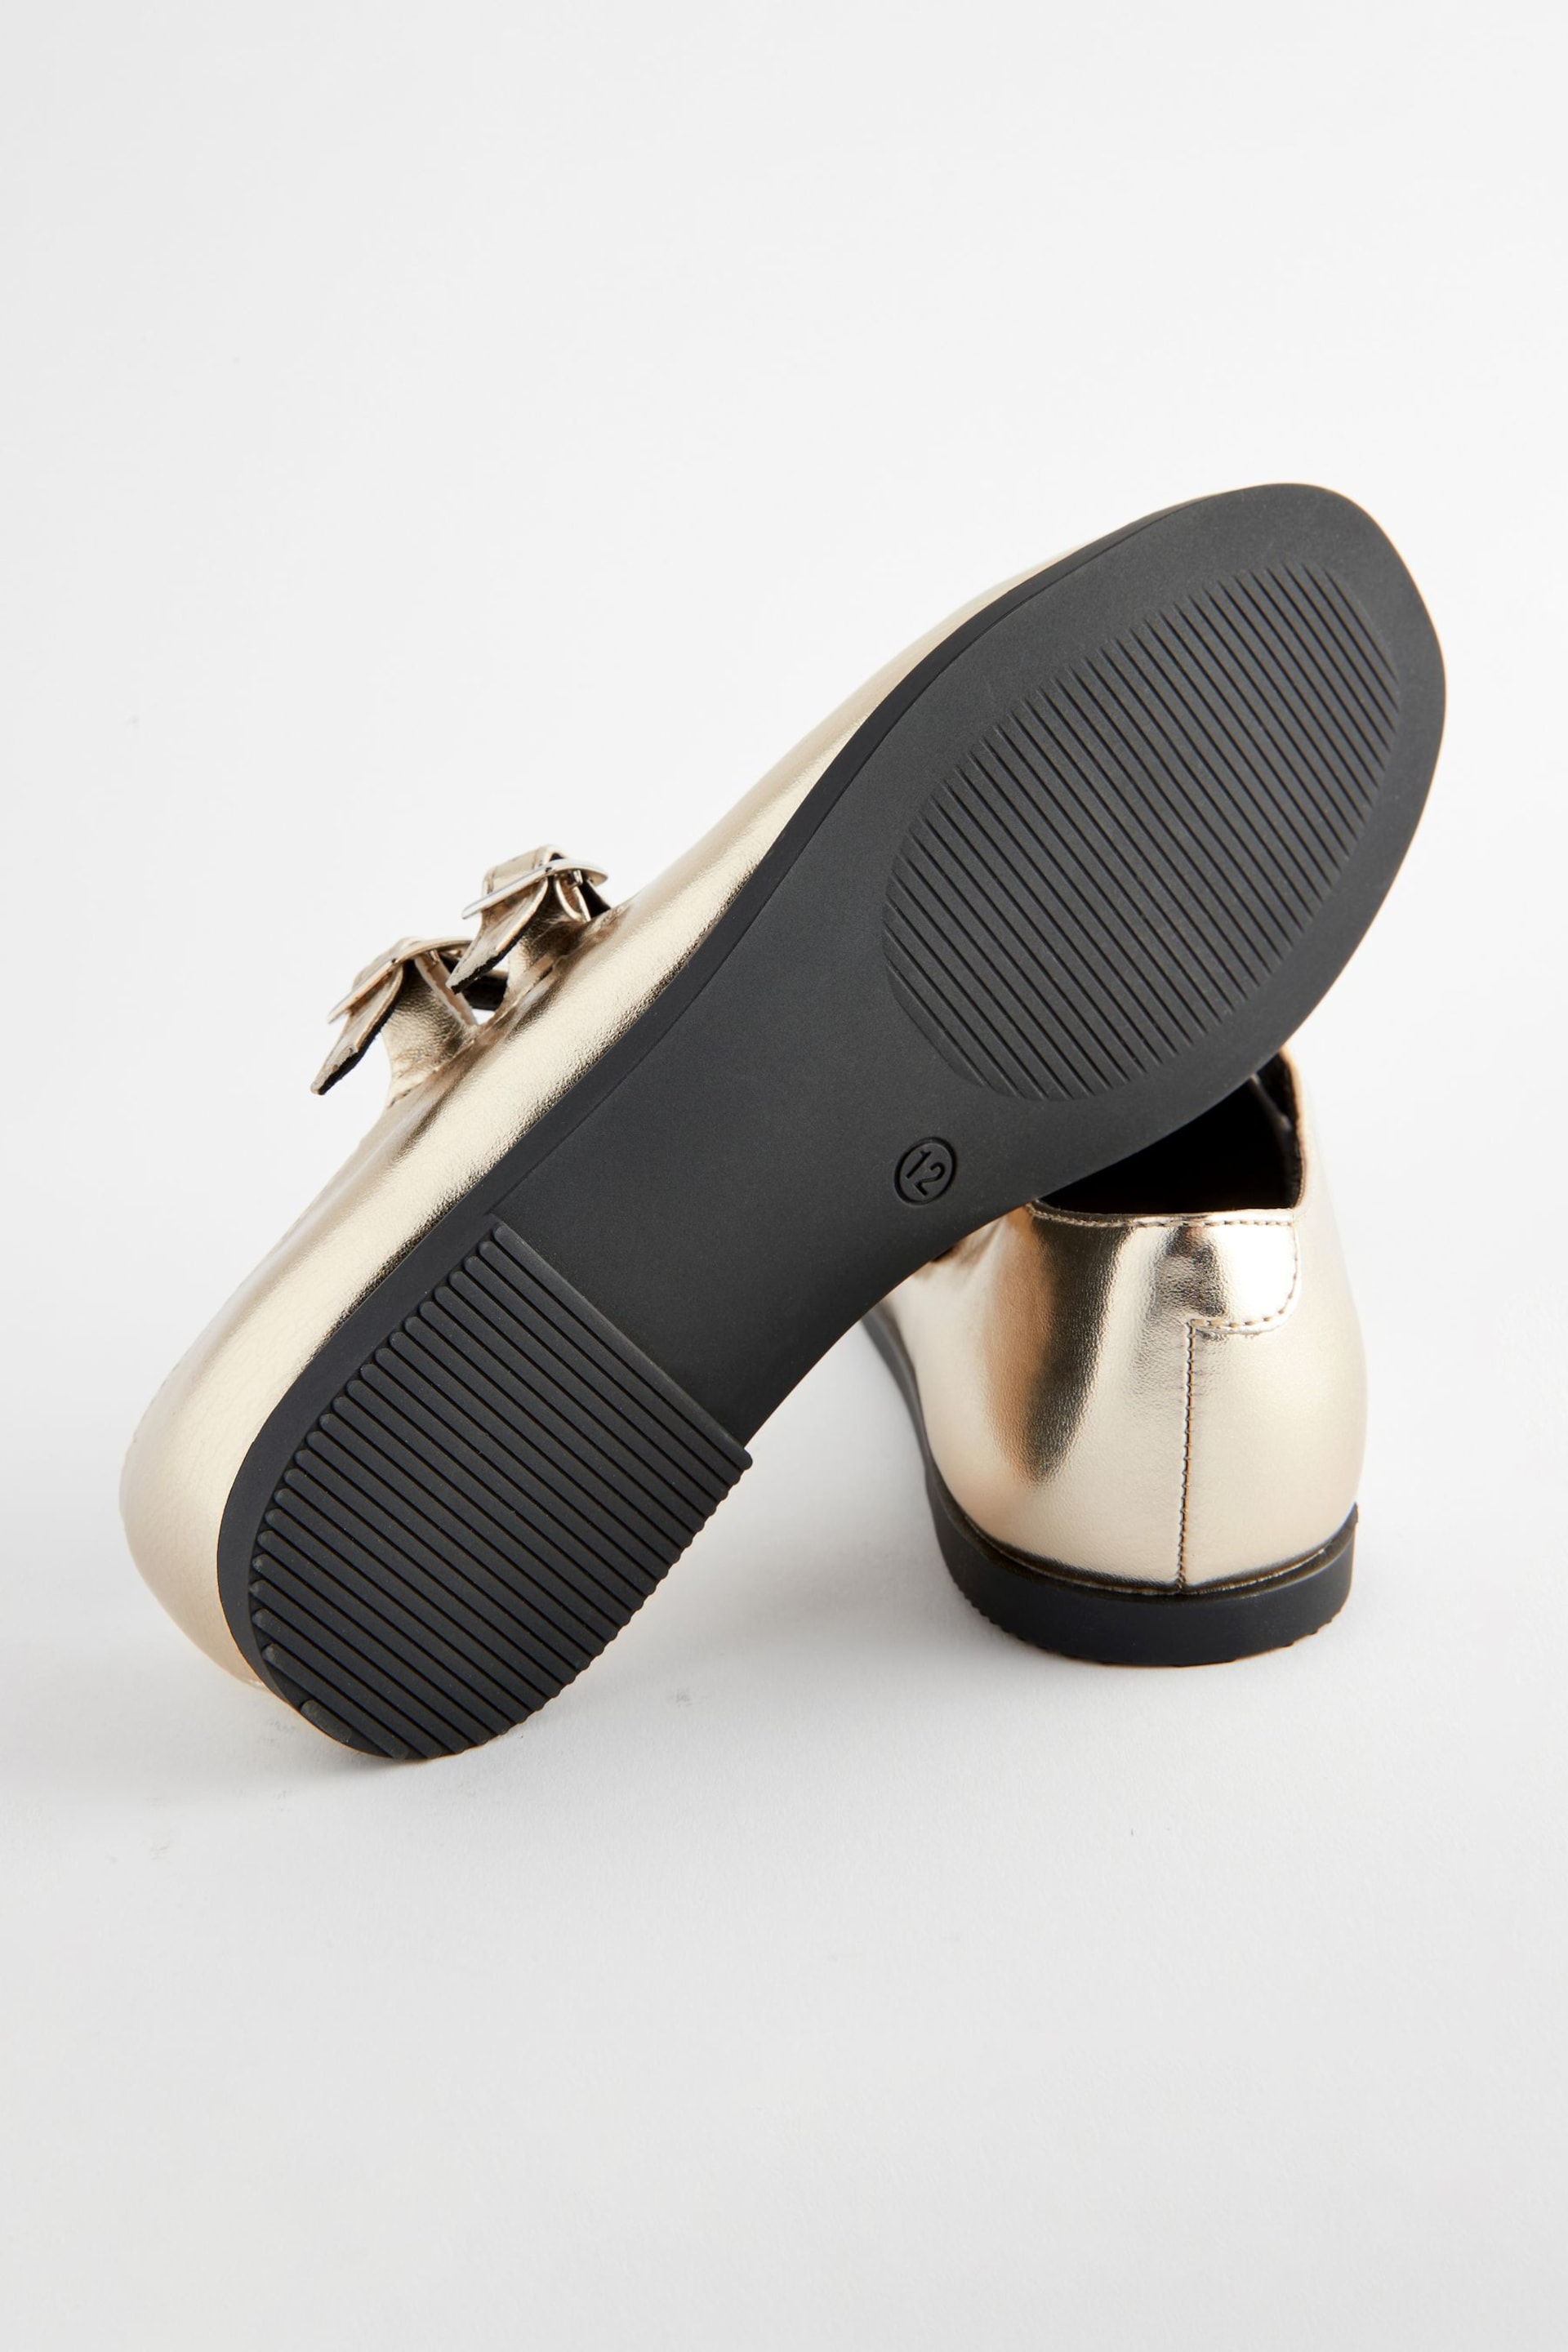 Gold Metallic Double Strap Mary Jane Shoes - Image 4 of 6